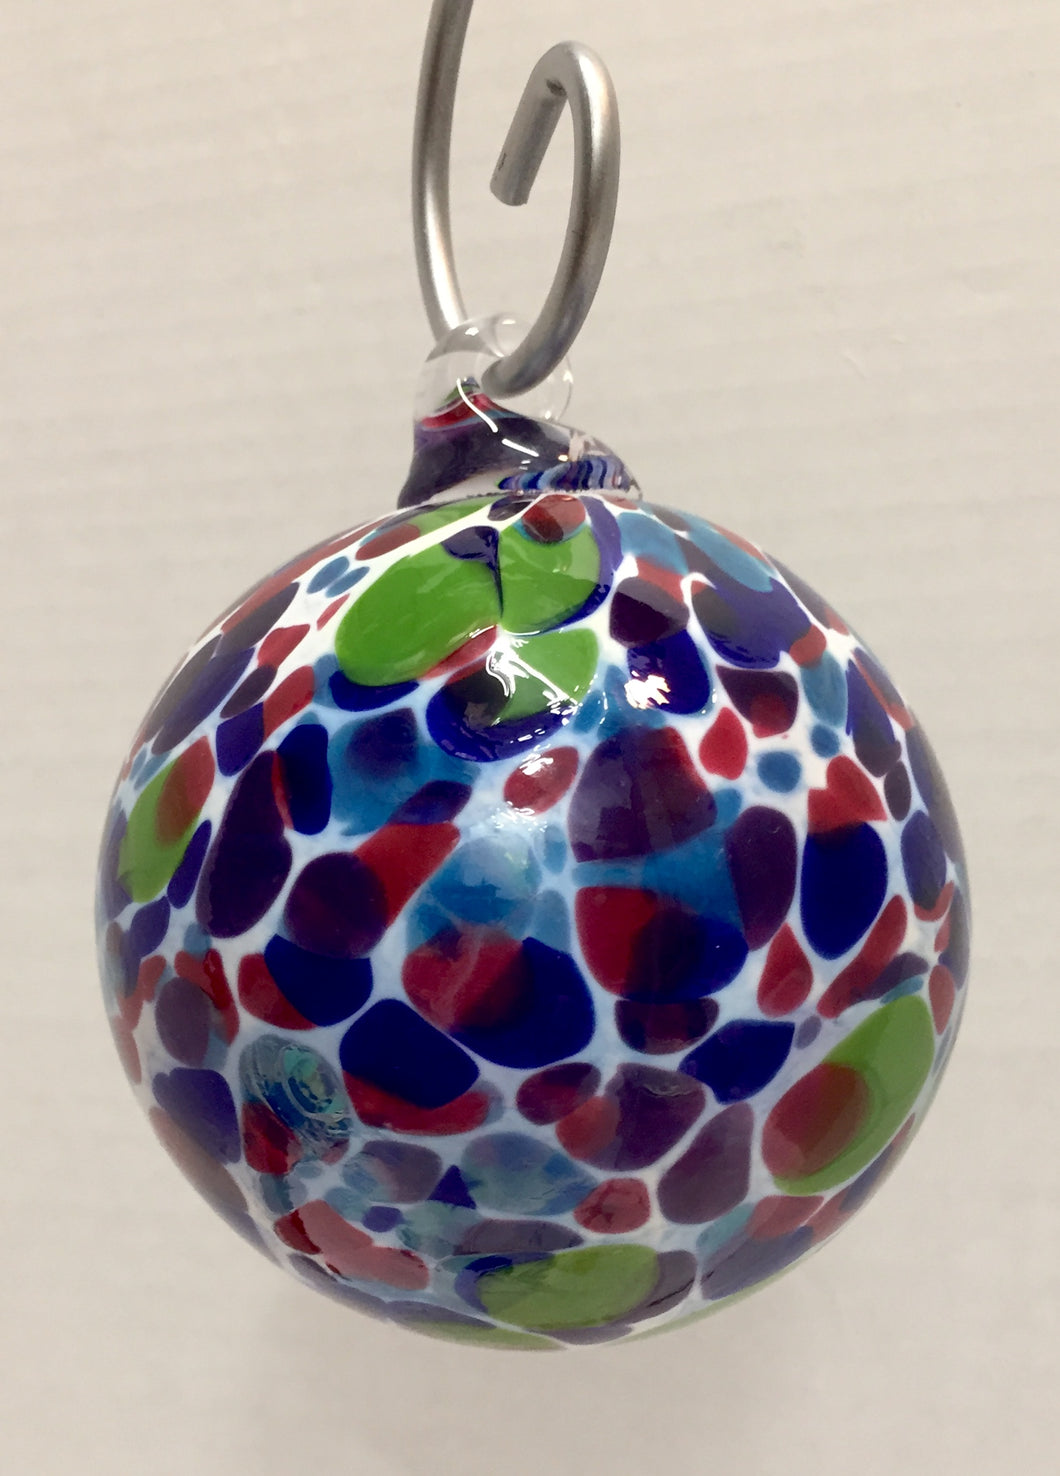 Frit Glass Ornament in Cobalt, Green Apple, Red and White